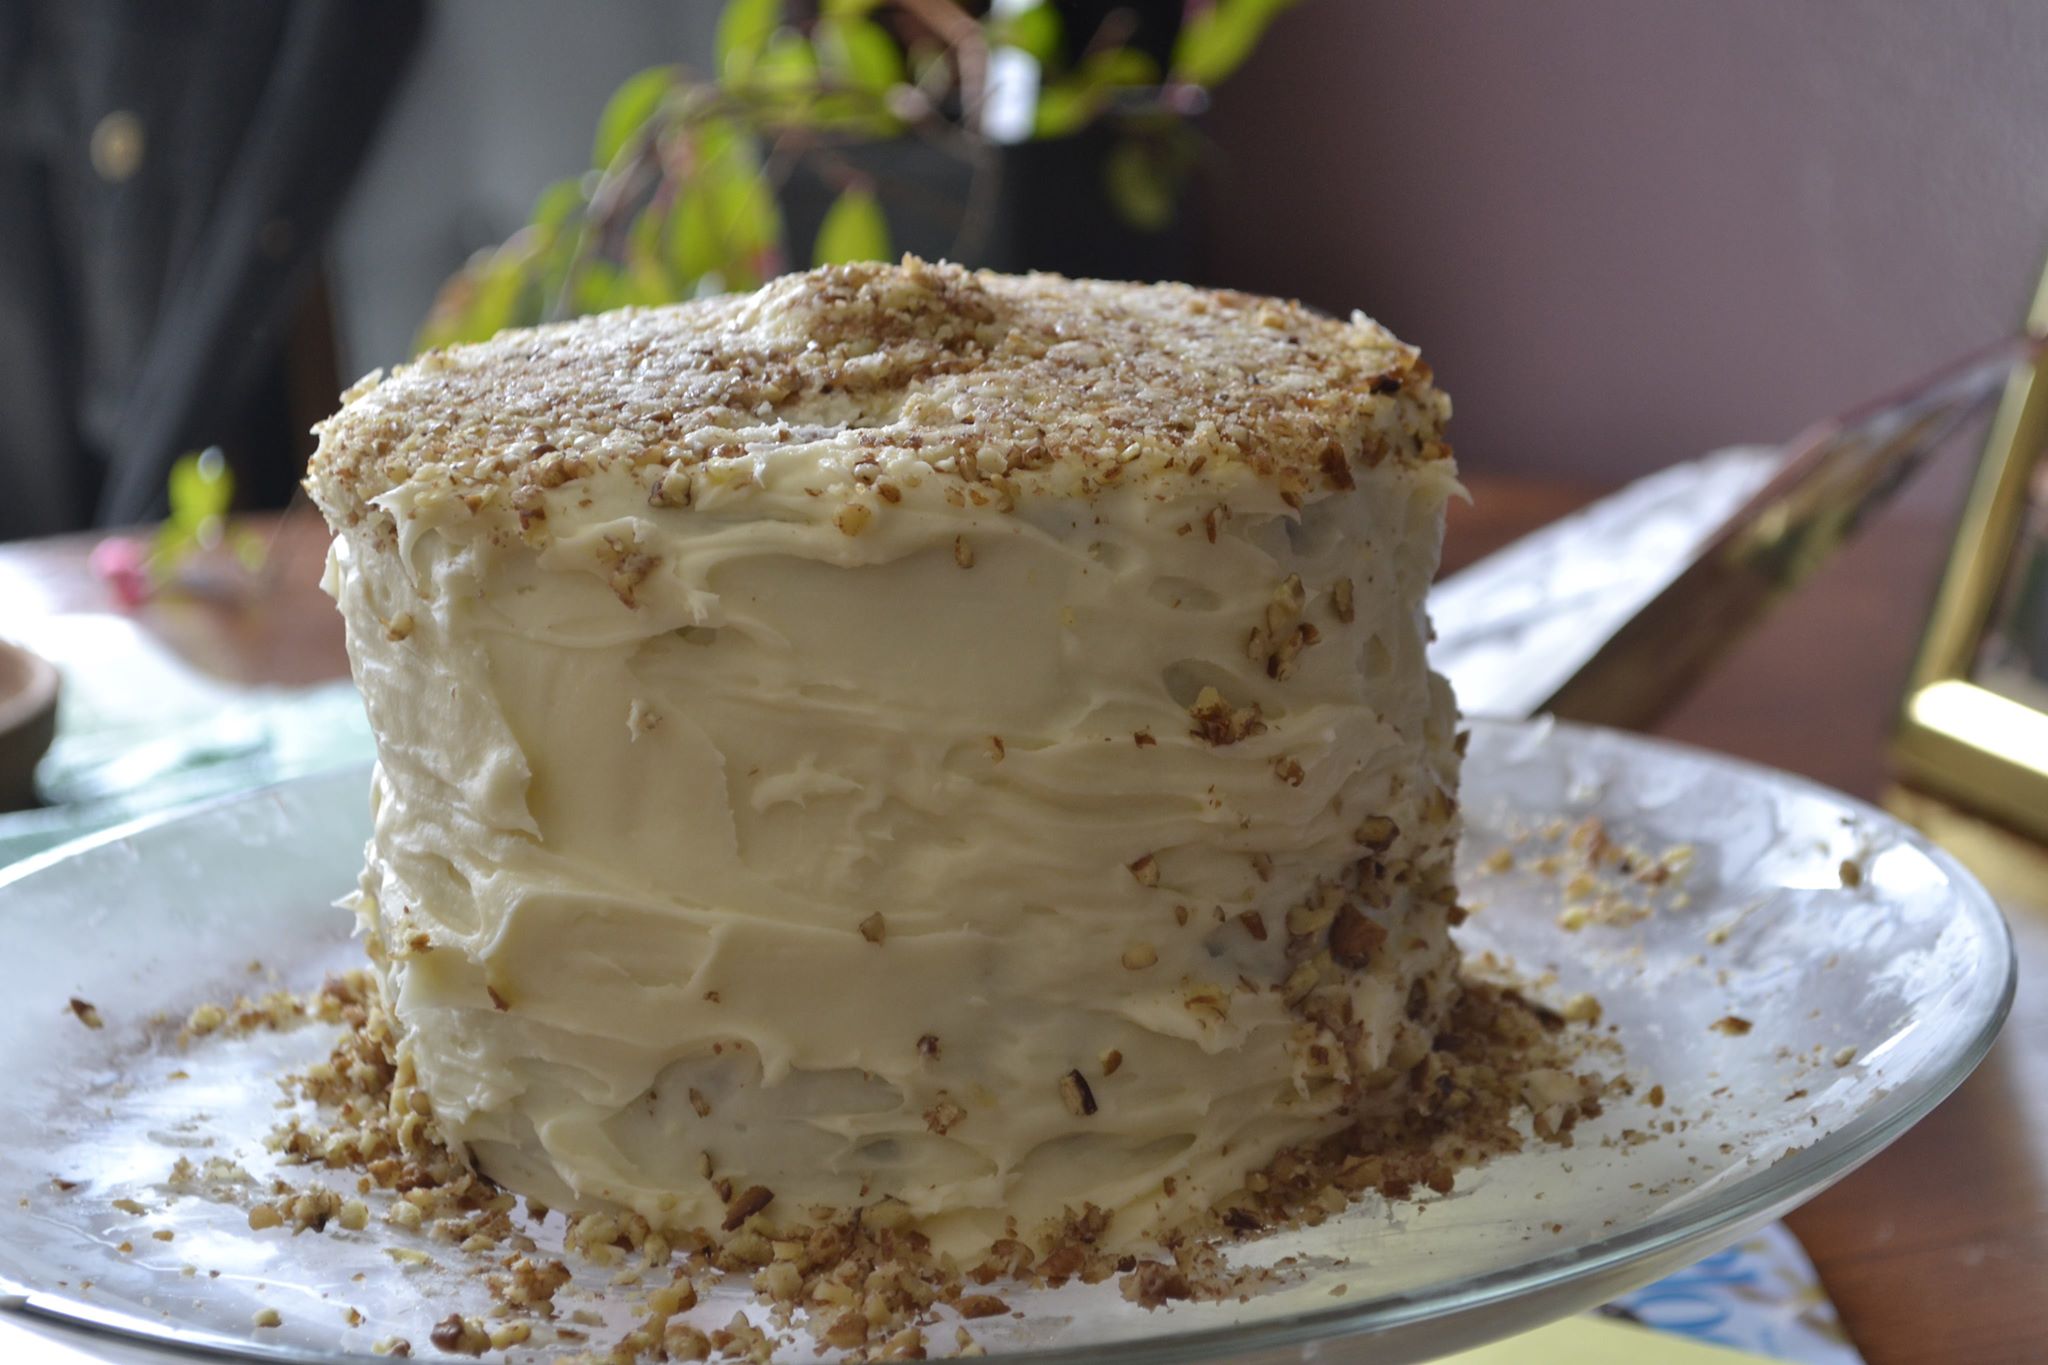 Awesome Carrot Cake with Cream Cheese Frosting